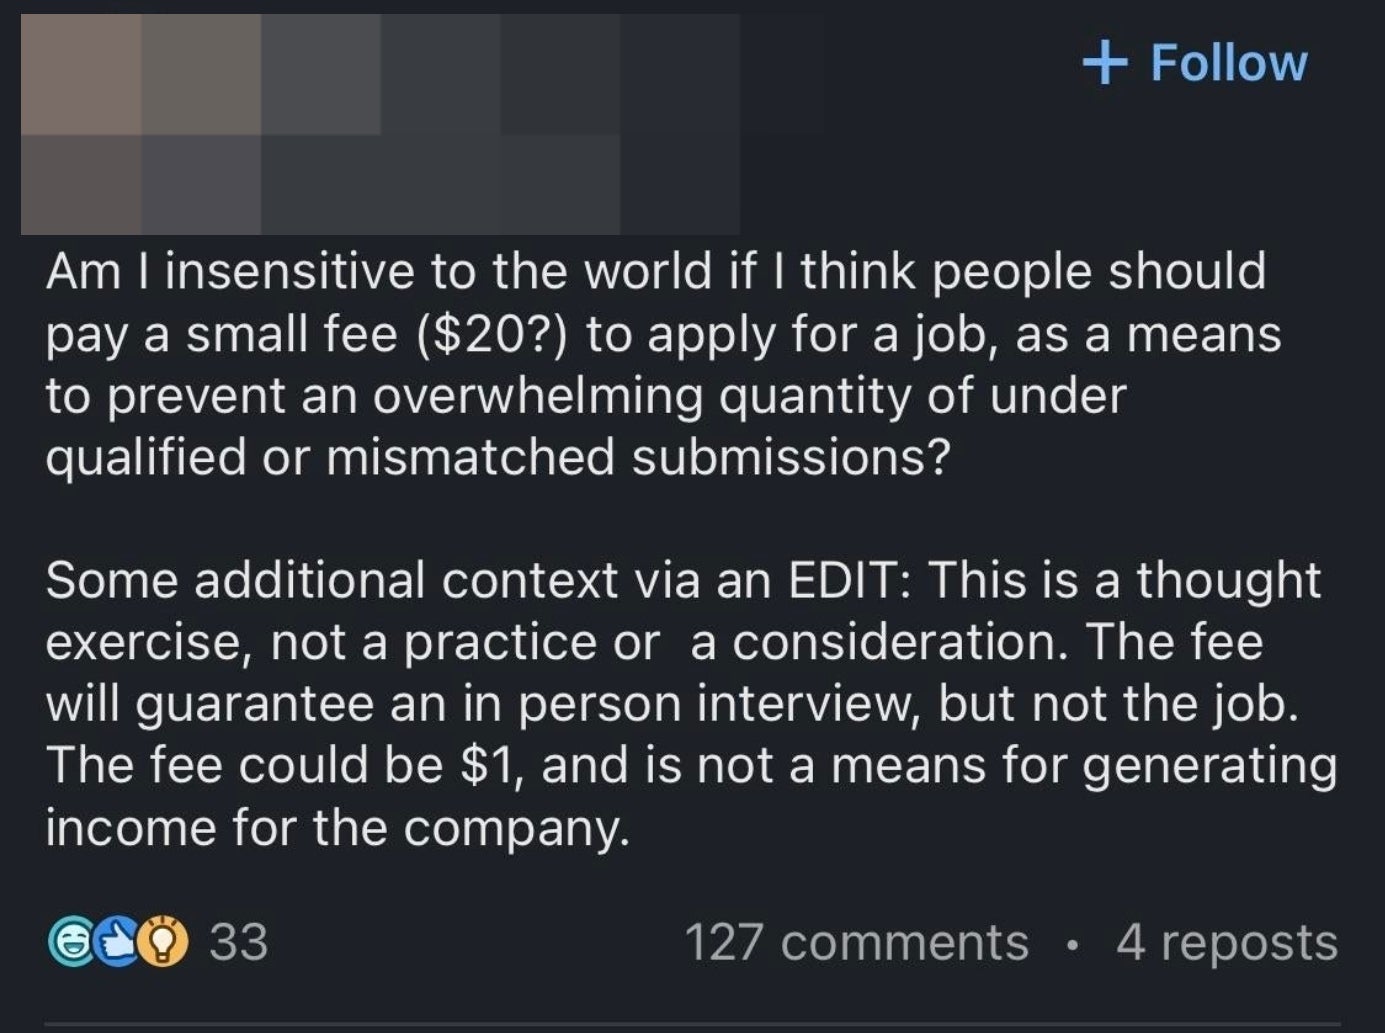 &quot;Am I insensitive to the world if I think people should pay a small fee to apply for a job...&quot;